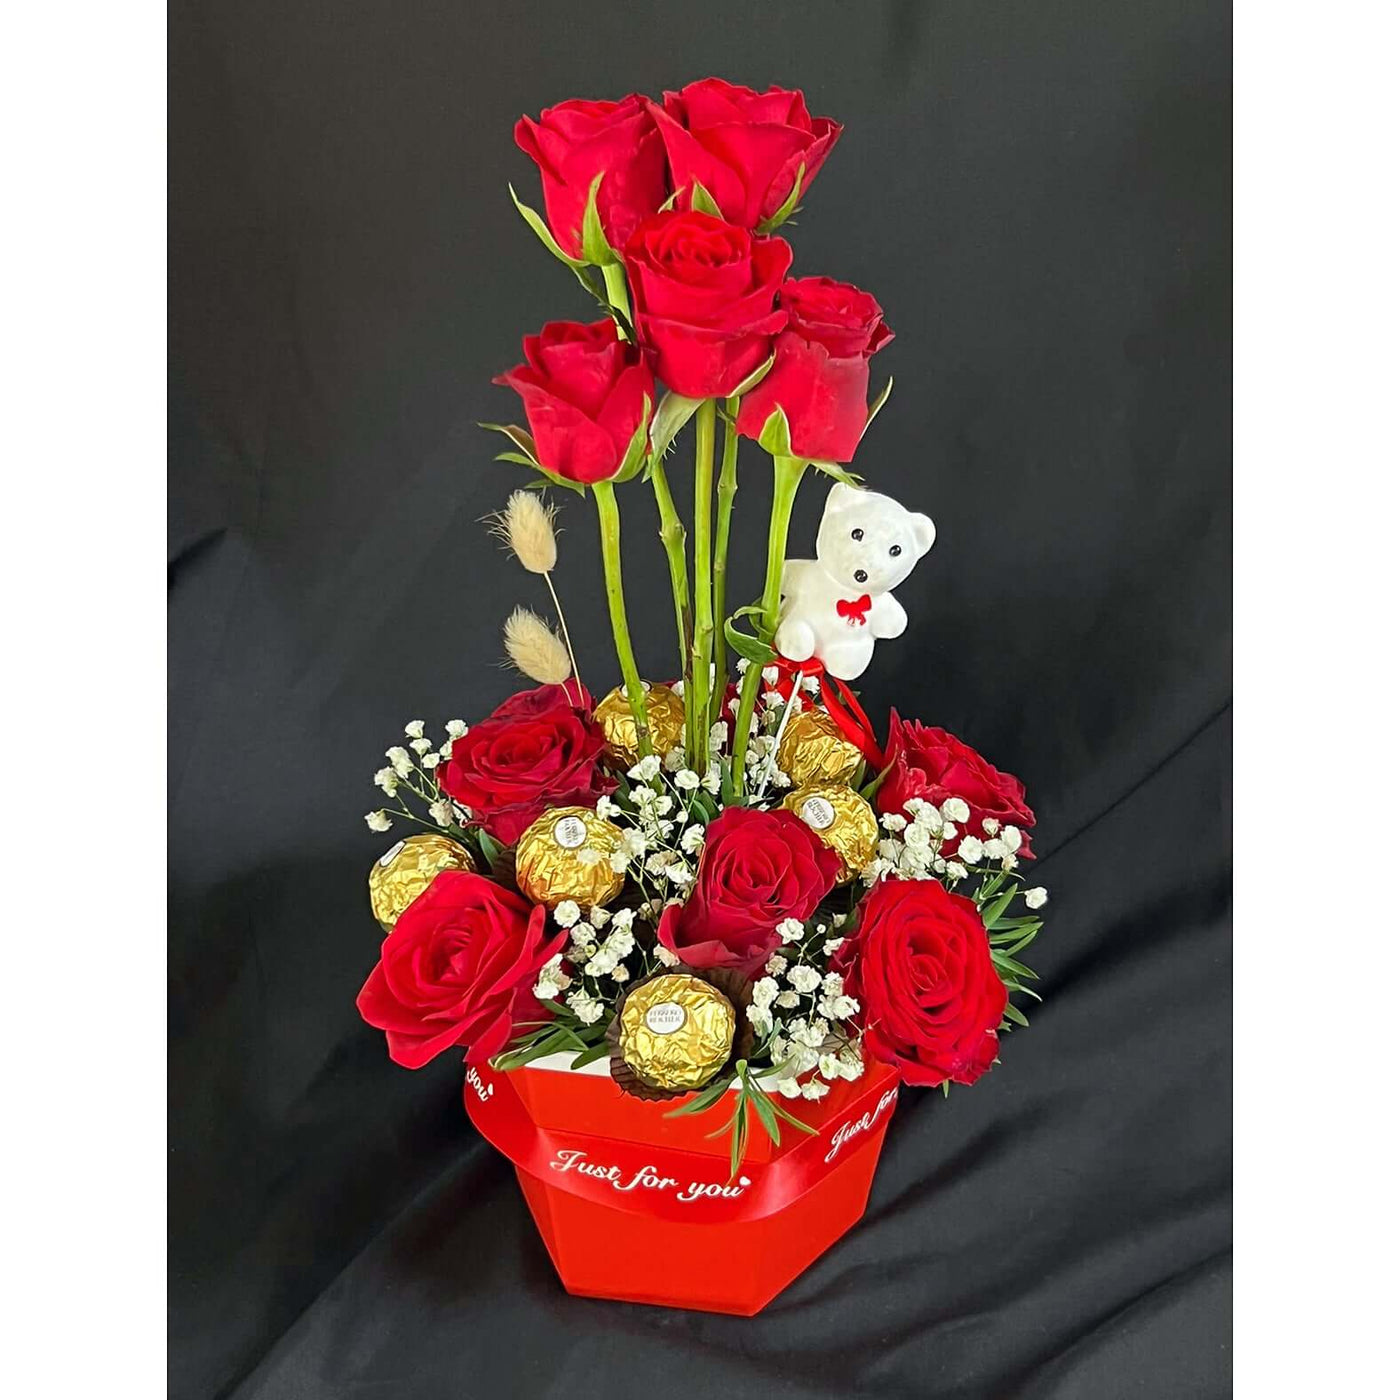 Just-for-You-Roses-Chocolates-Box-DodoMarket-Delivery-Mauritius